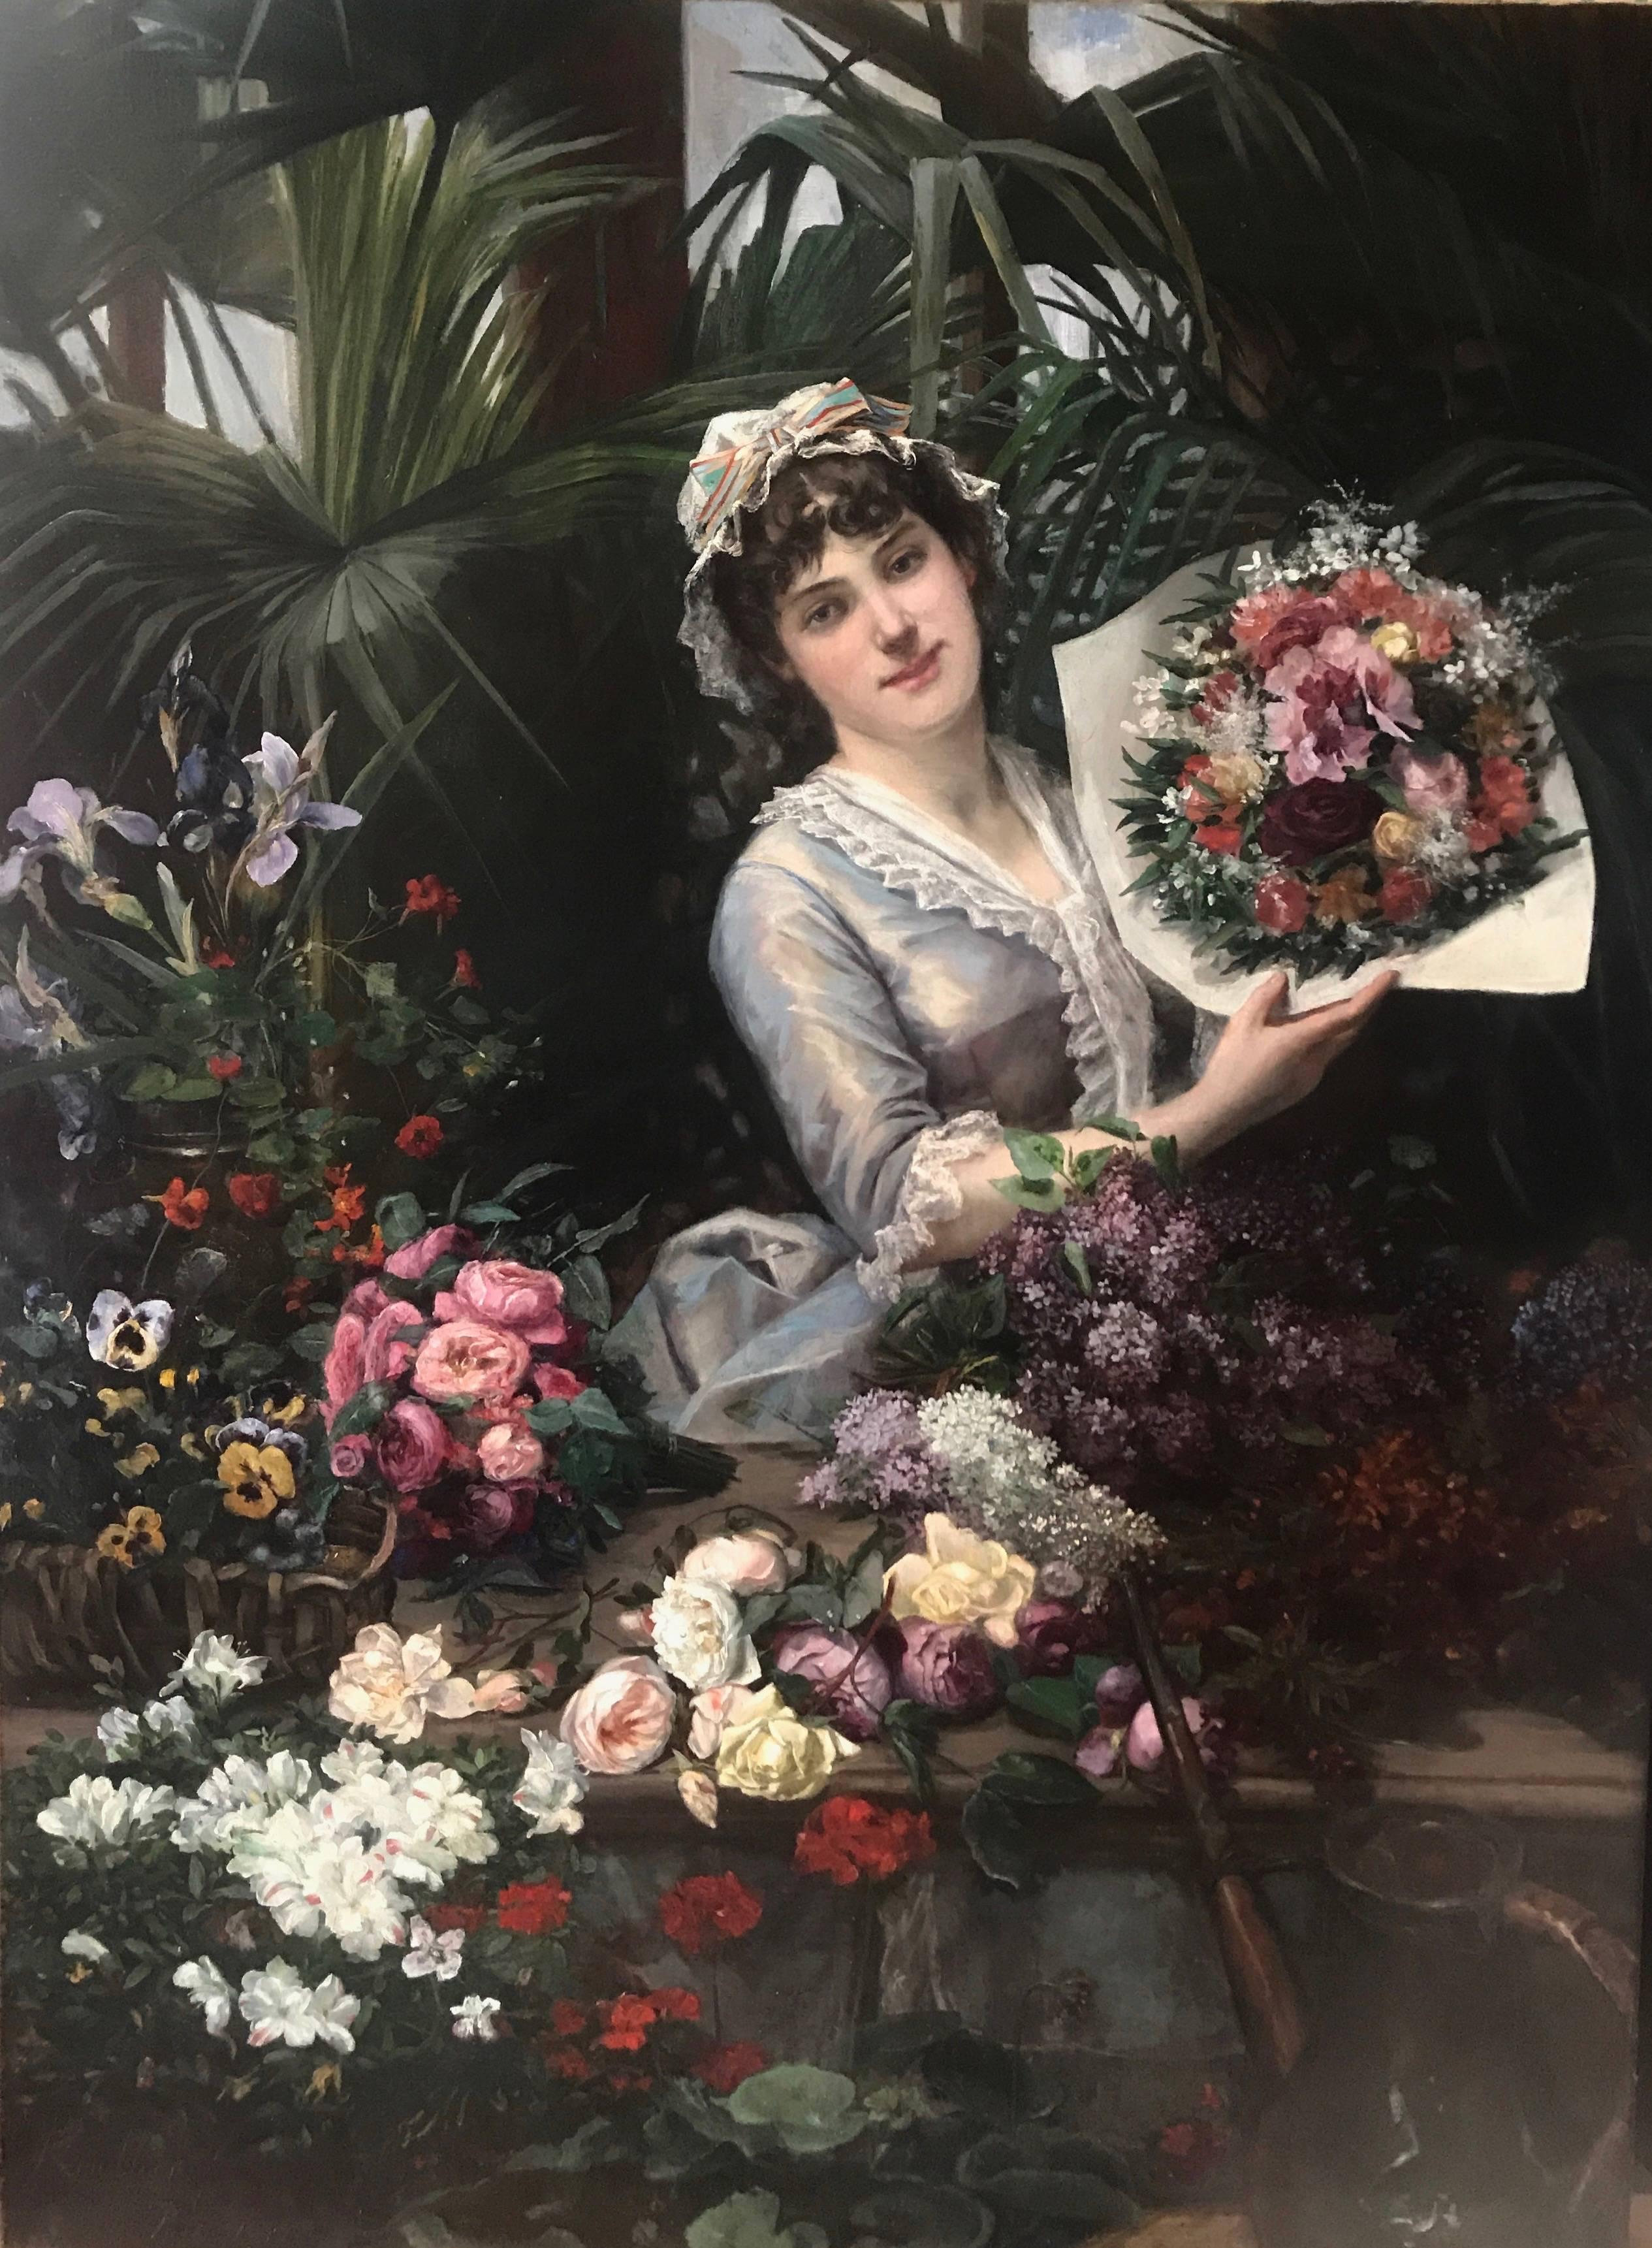 Beautiful Woman Arranging Flowers in Atrium Conservatory Greenhouse PARIS 1884  - Painting by Christian Henri Roullier